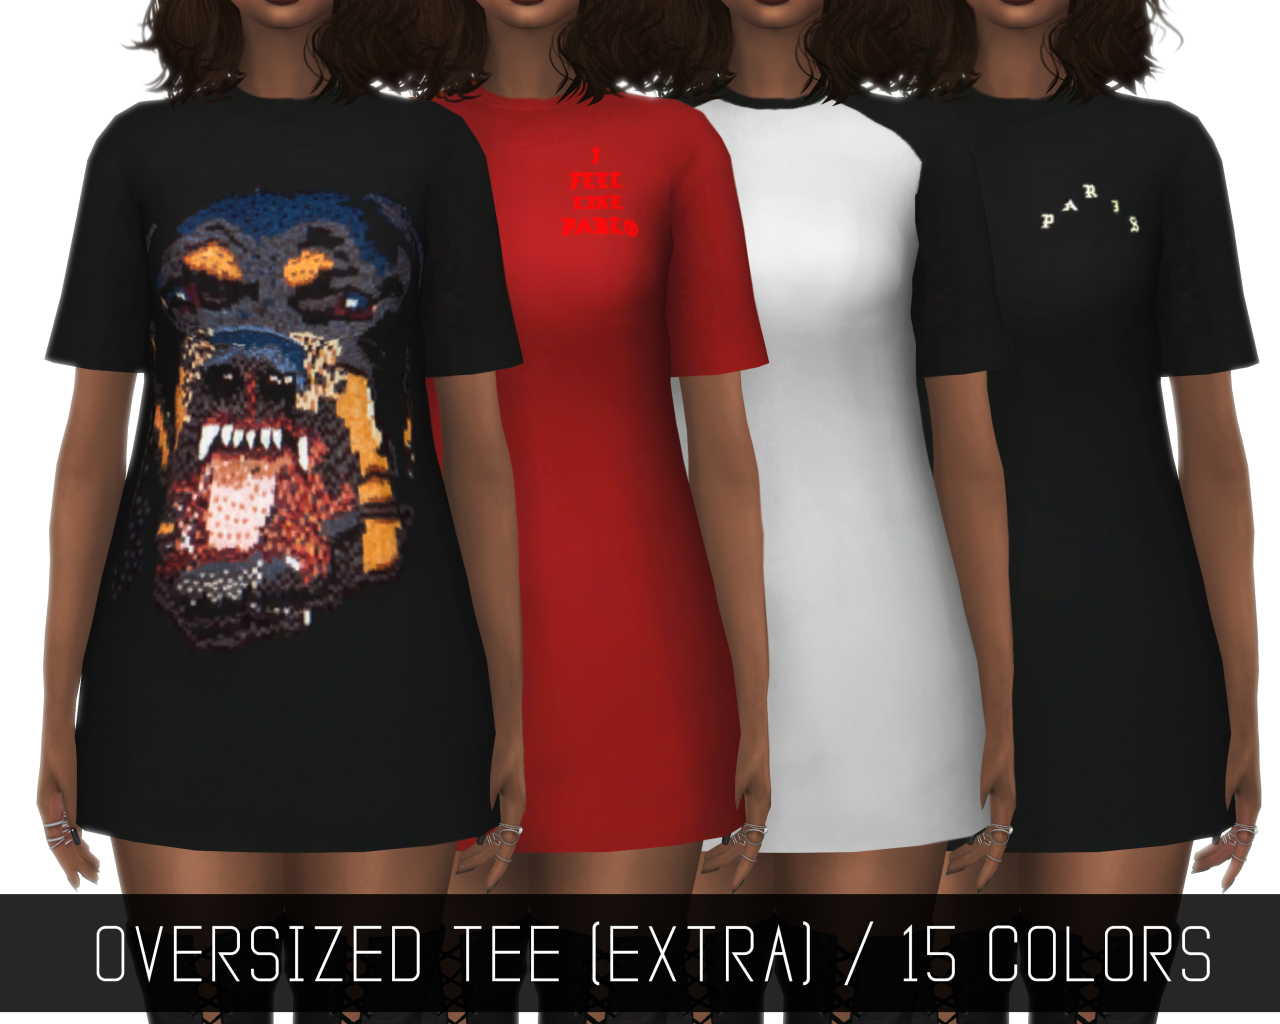 Sims 4 CC's - The Best: OVERSIZED TEE by simpliciaty